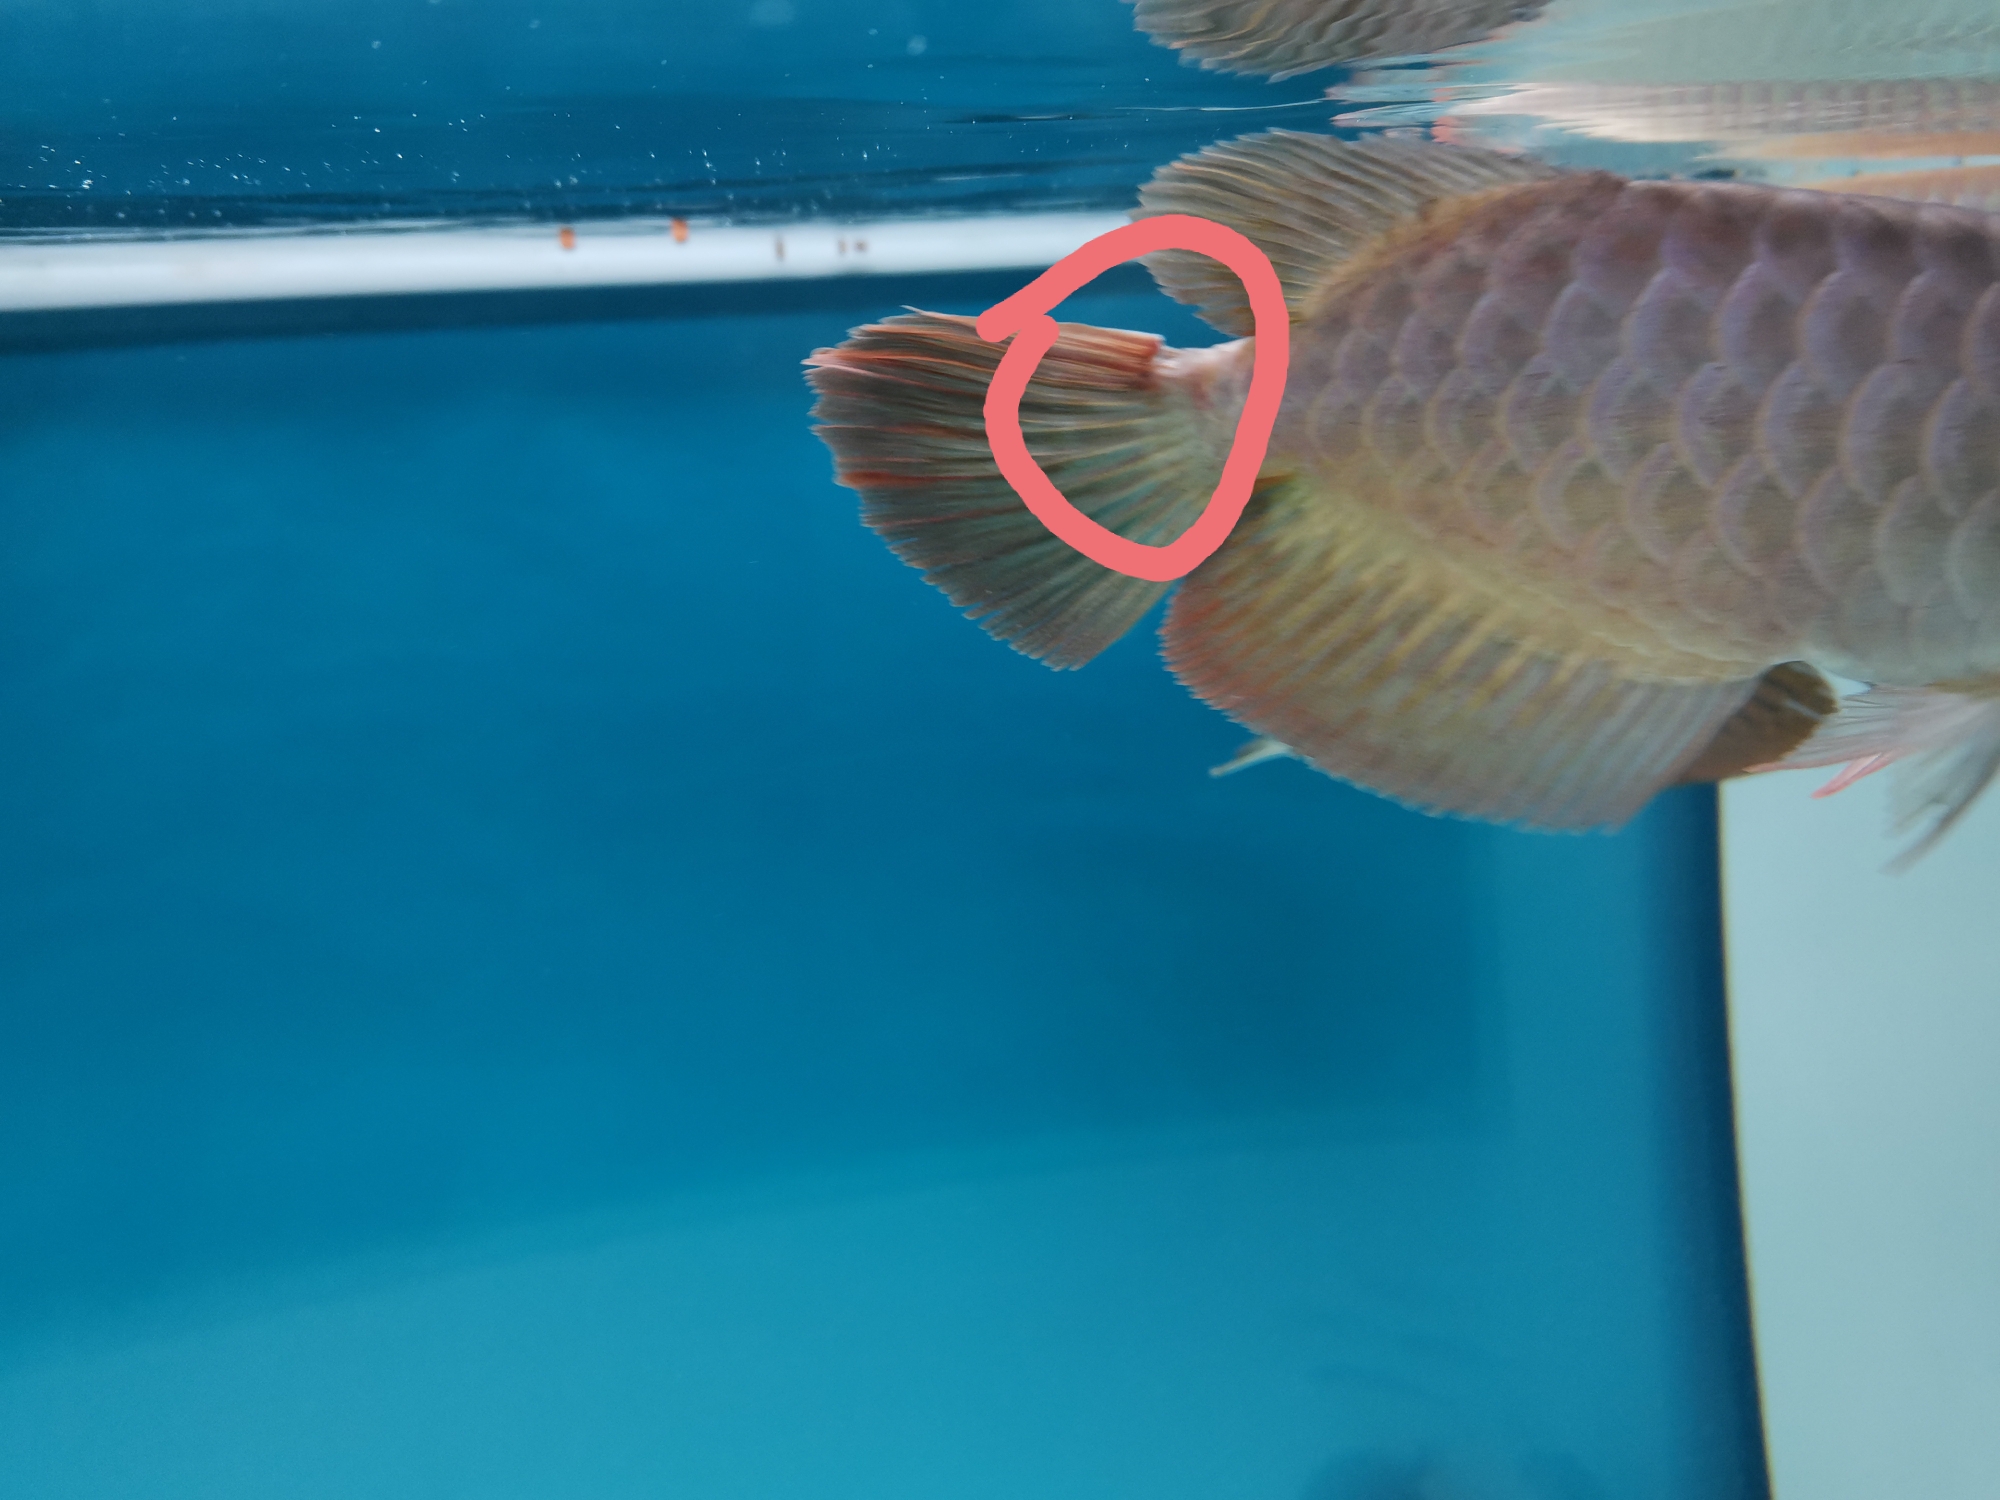 Brazilian Asiatic Fish Supposed to fight injured？